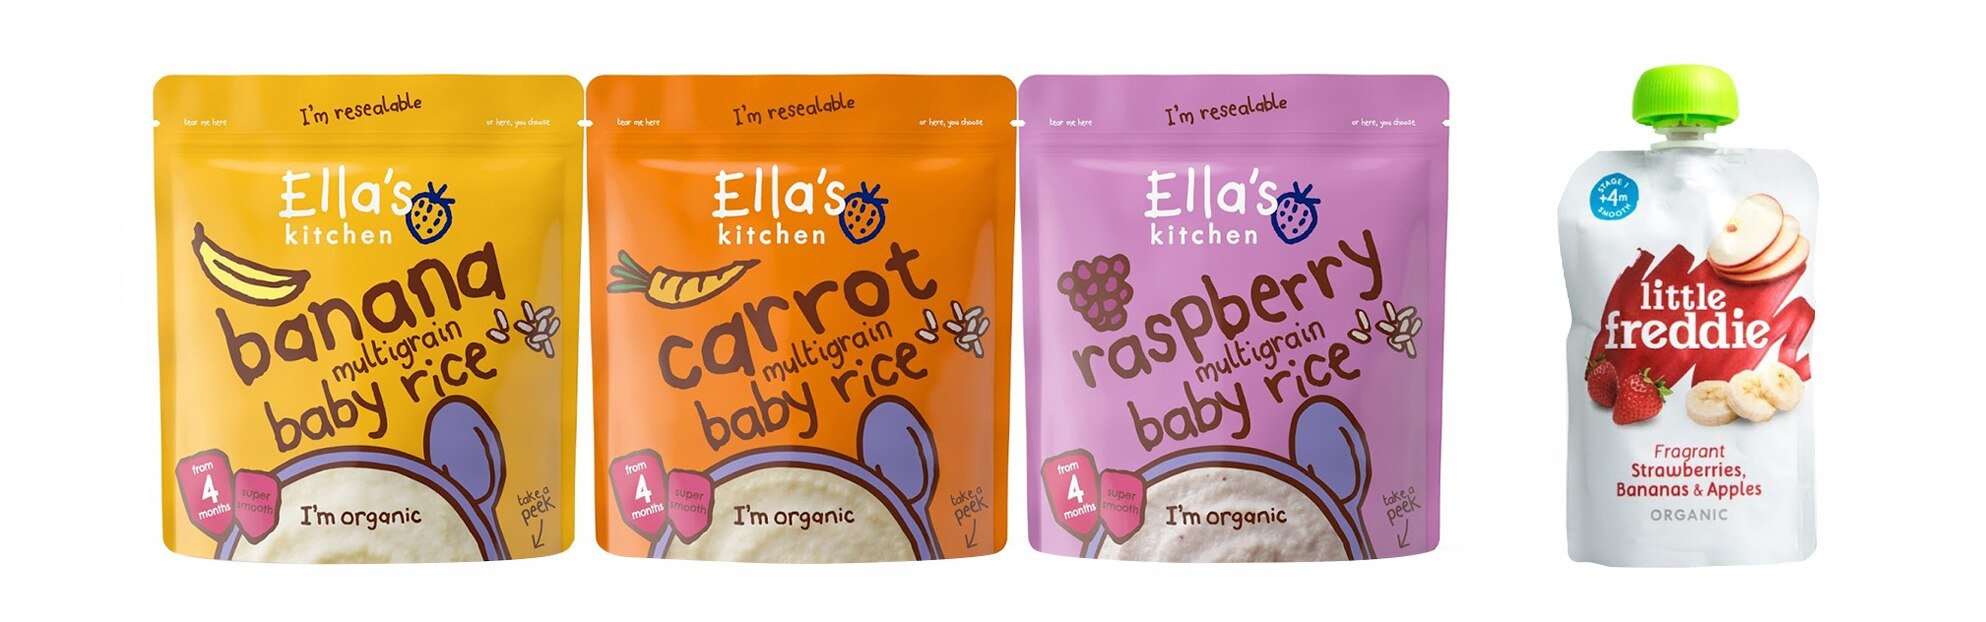 organic-baby-rice-packaging-pouch.jpg